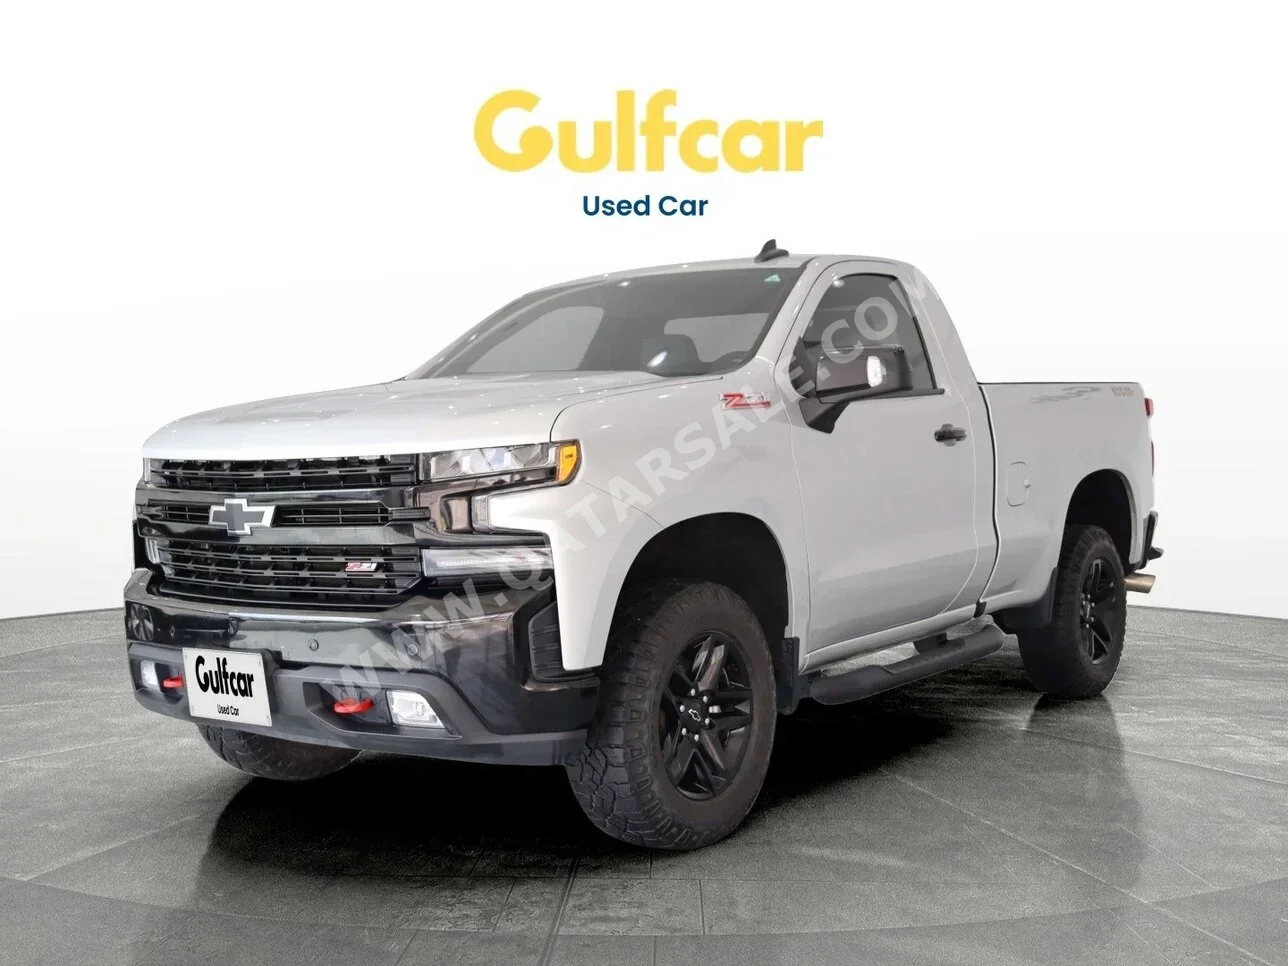 Chevrolet  Silverado  LT  2022  Automatic  57,381 Km  8 Cylinder  Four Wheel Drive (4WD)  Pick Up  Silver  With Warranty